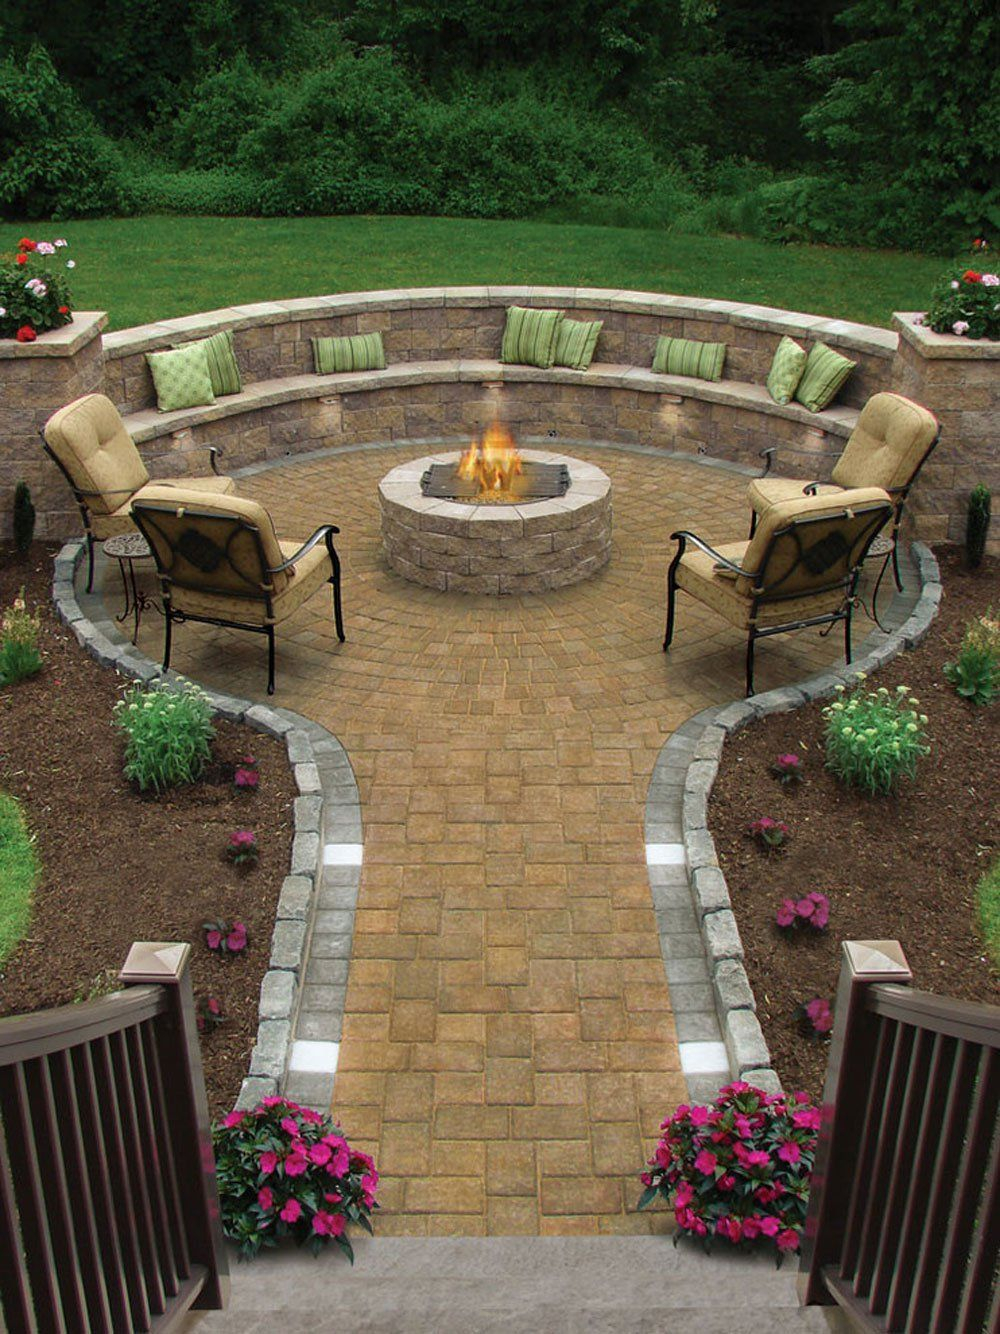 17 Of The Most Amazing Seating Area Around The Fire Pit Ever within measurements 1000 X 1334